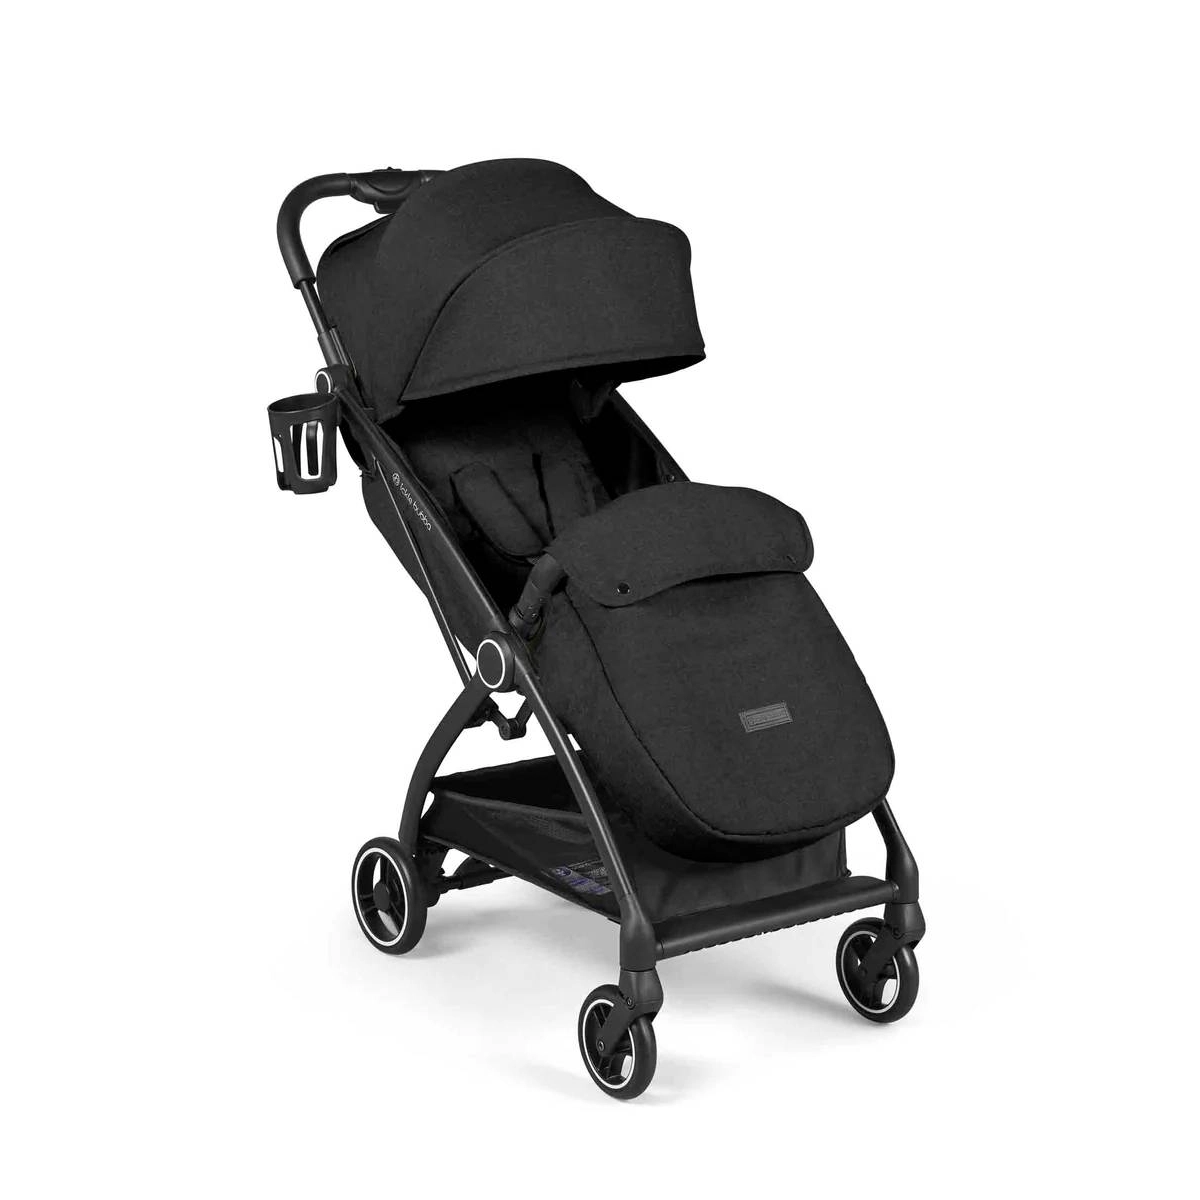 Ickle Bubba Aries Max Autofold Stroller